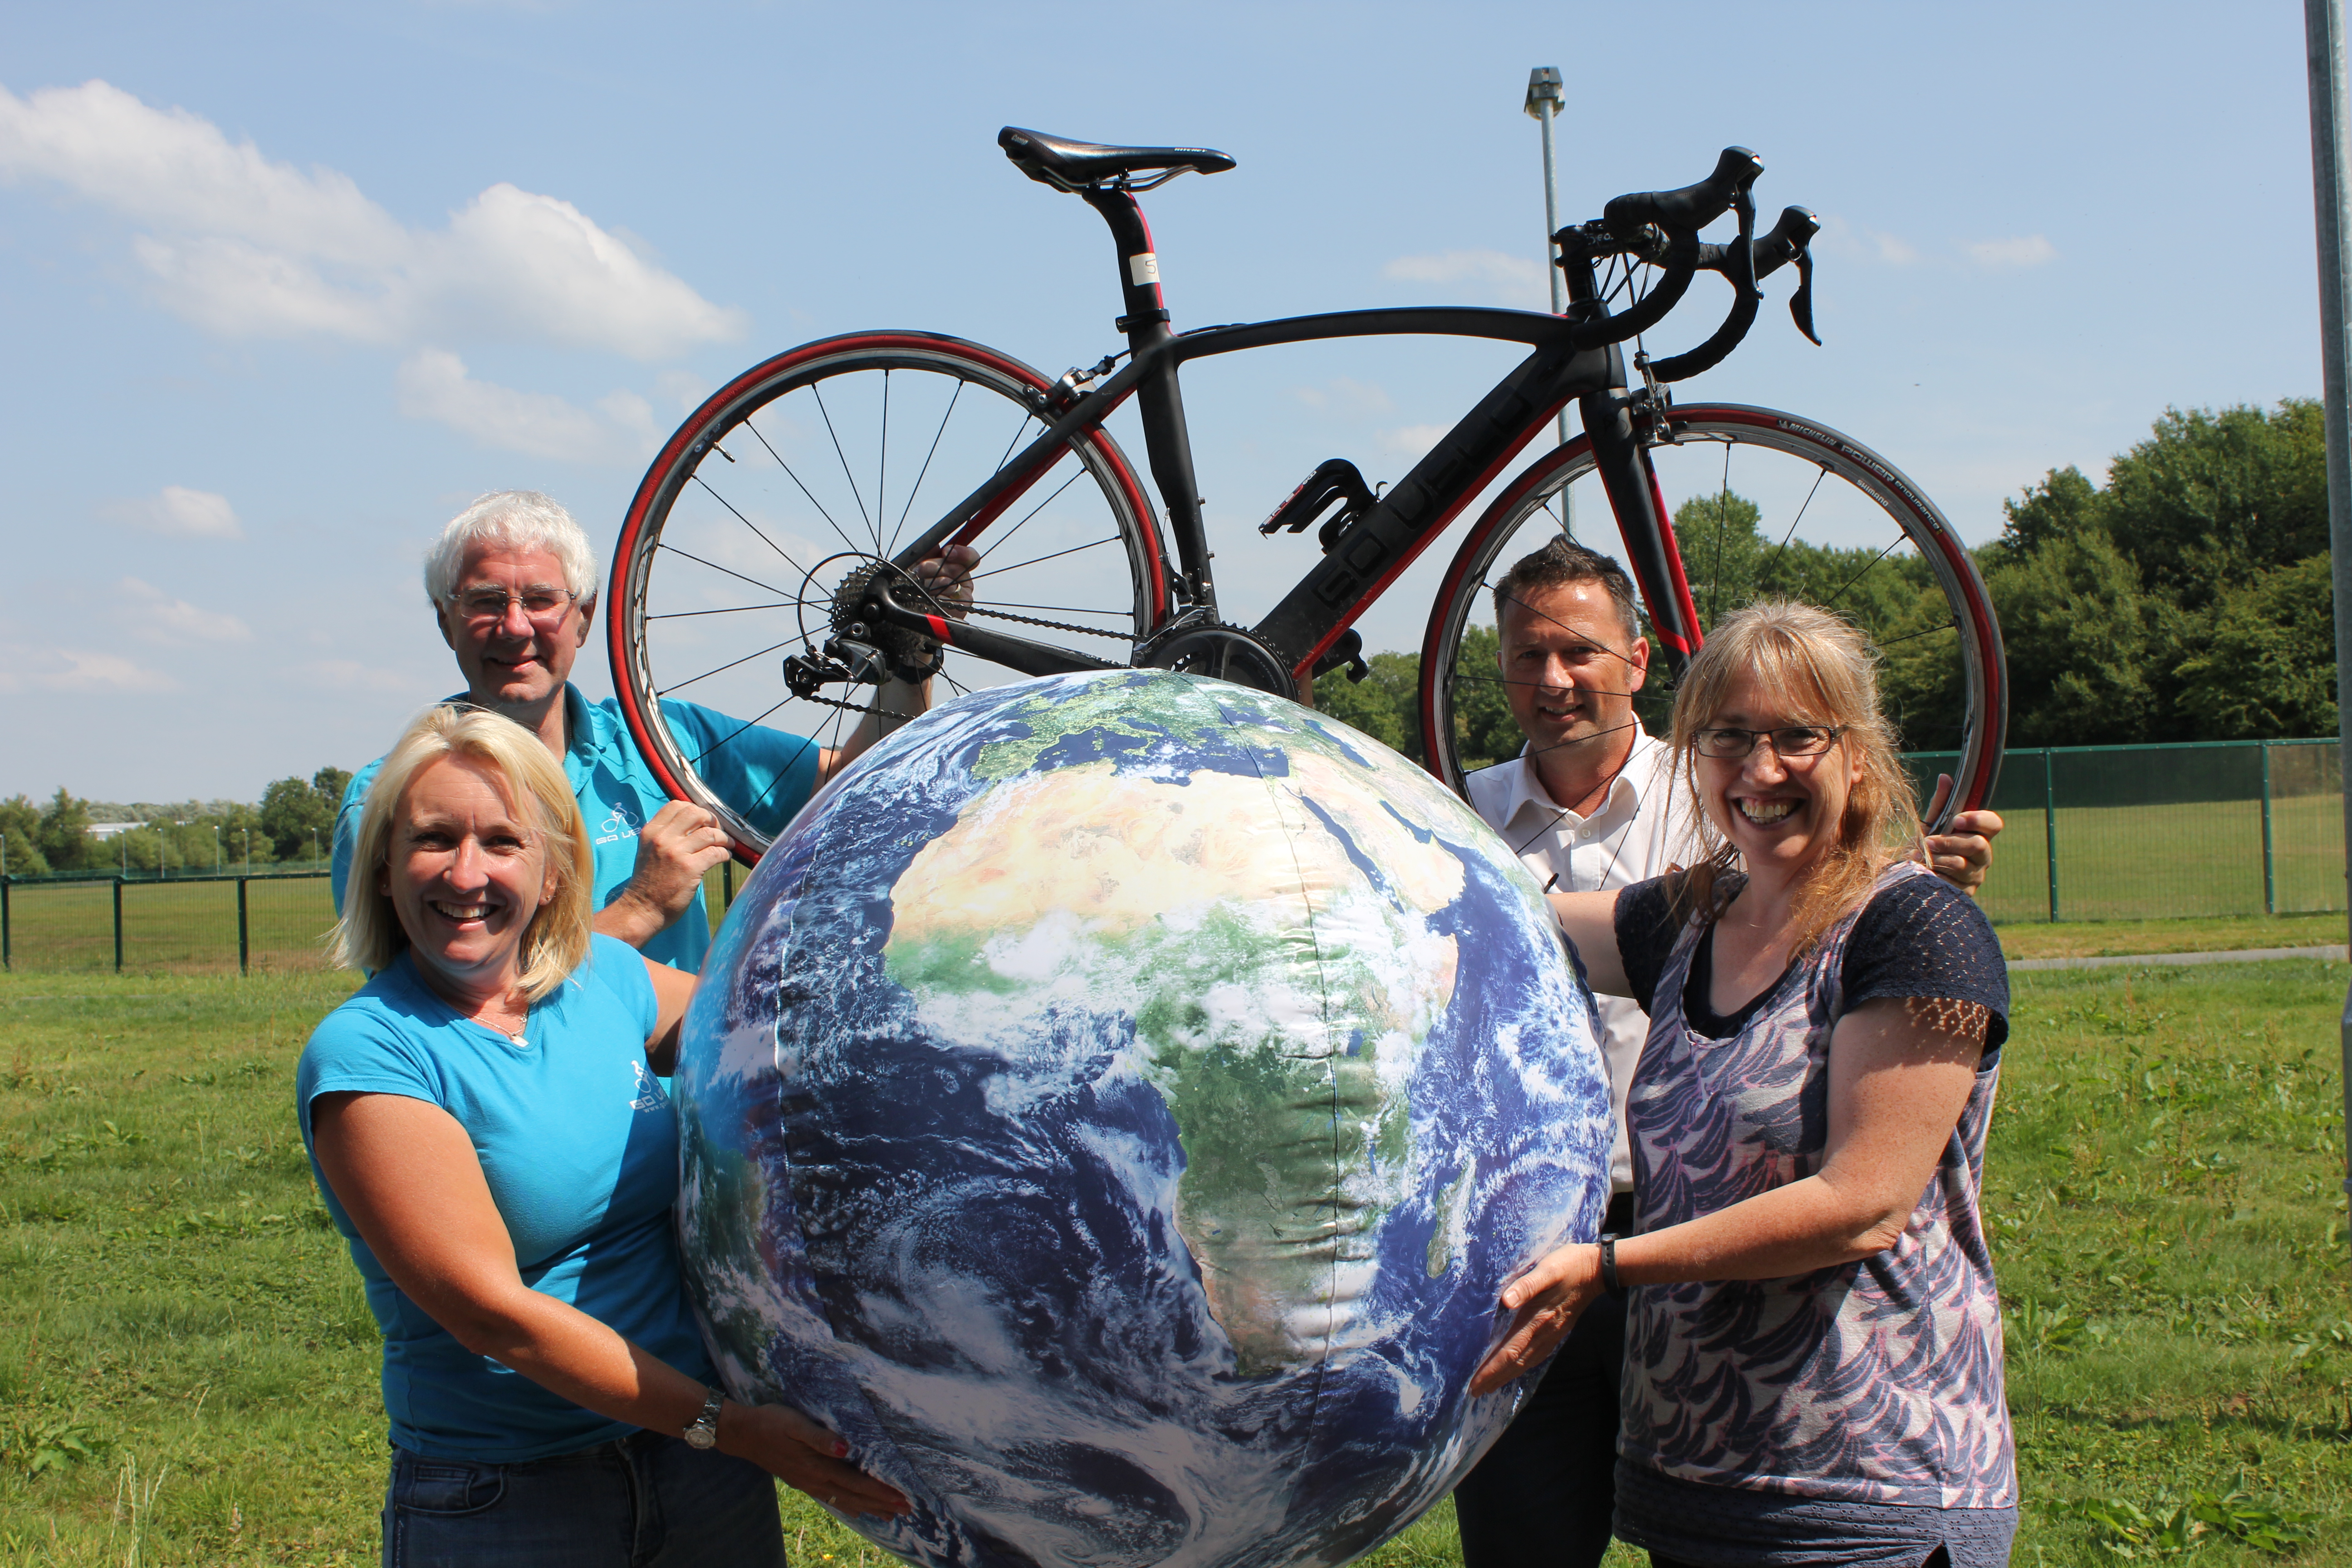 24 hour cycling raises thousands for Pendleside Hospice